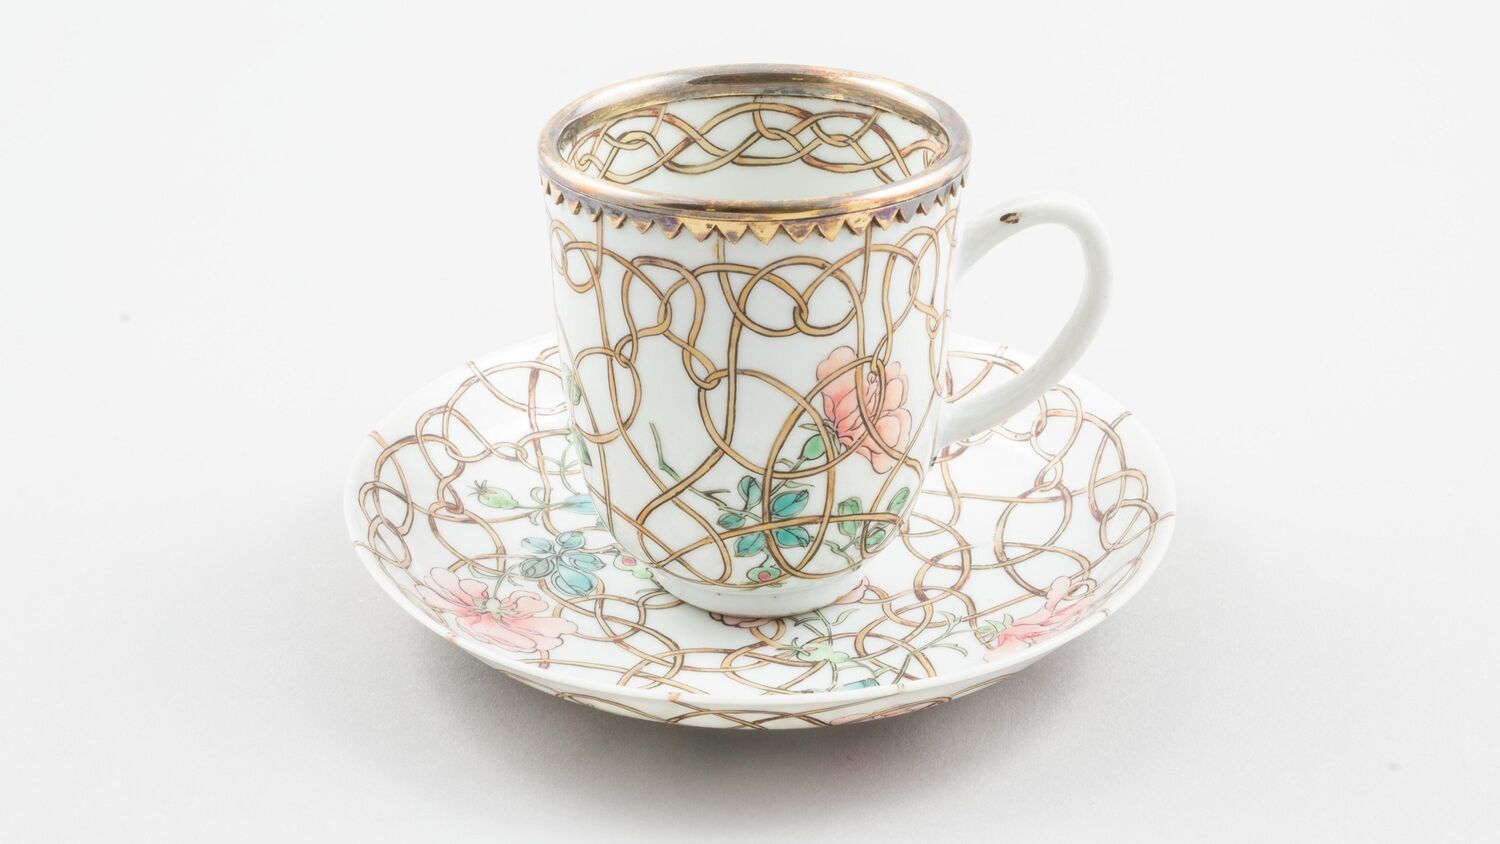 A tea cup sitting on a matching saucer is displayed against a plain grey background. It has a silver-gilt mount and is decorated with pink flowers and gold tendrils.